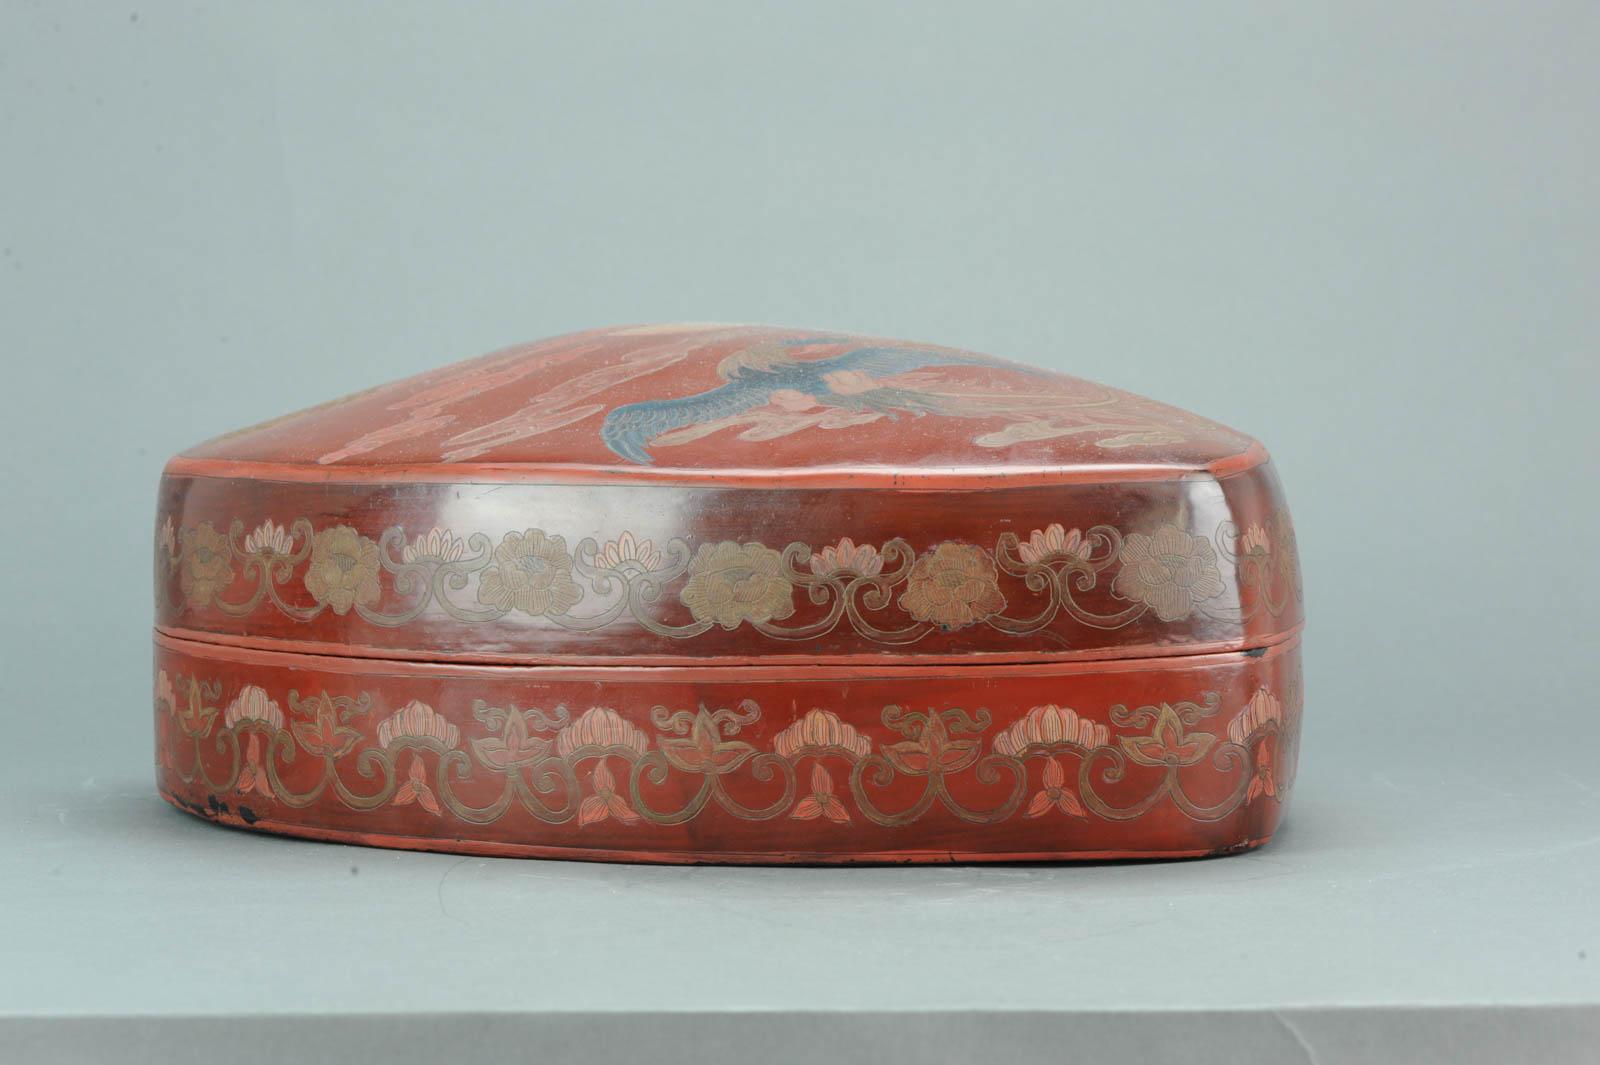 Large Antique, circa 1900 Chinese Qing/Meiji Japanese Lacquer Box with Fenghuang For Sale 9